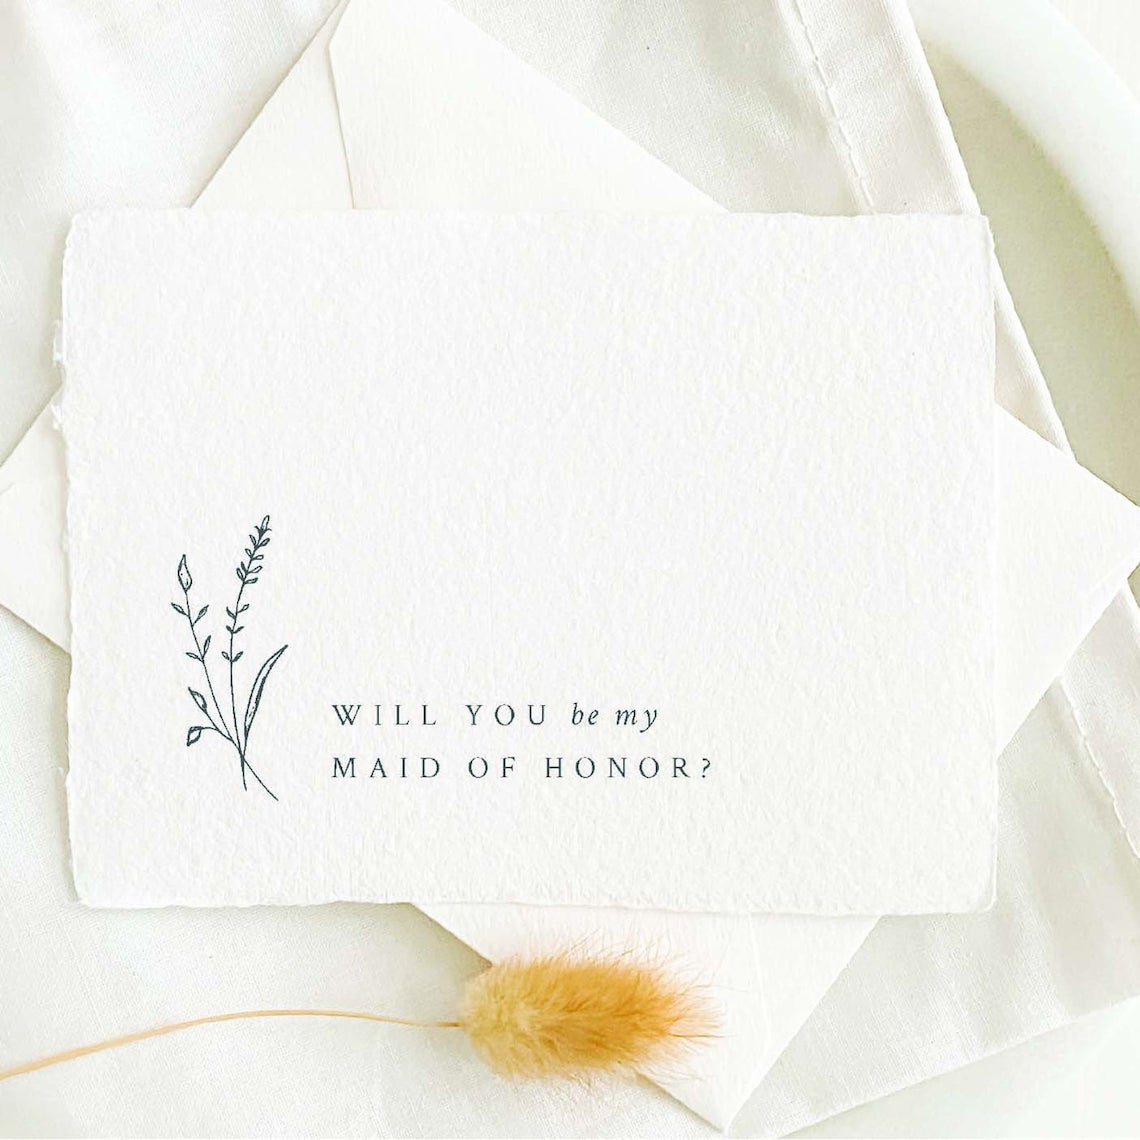 The Best Will You Be My Bridesmaid Cards Bridal Musings 24 - 20 tấm thiệp "Will You Be My Bridesmaid" hay nhất